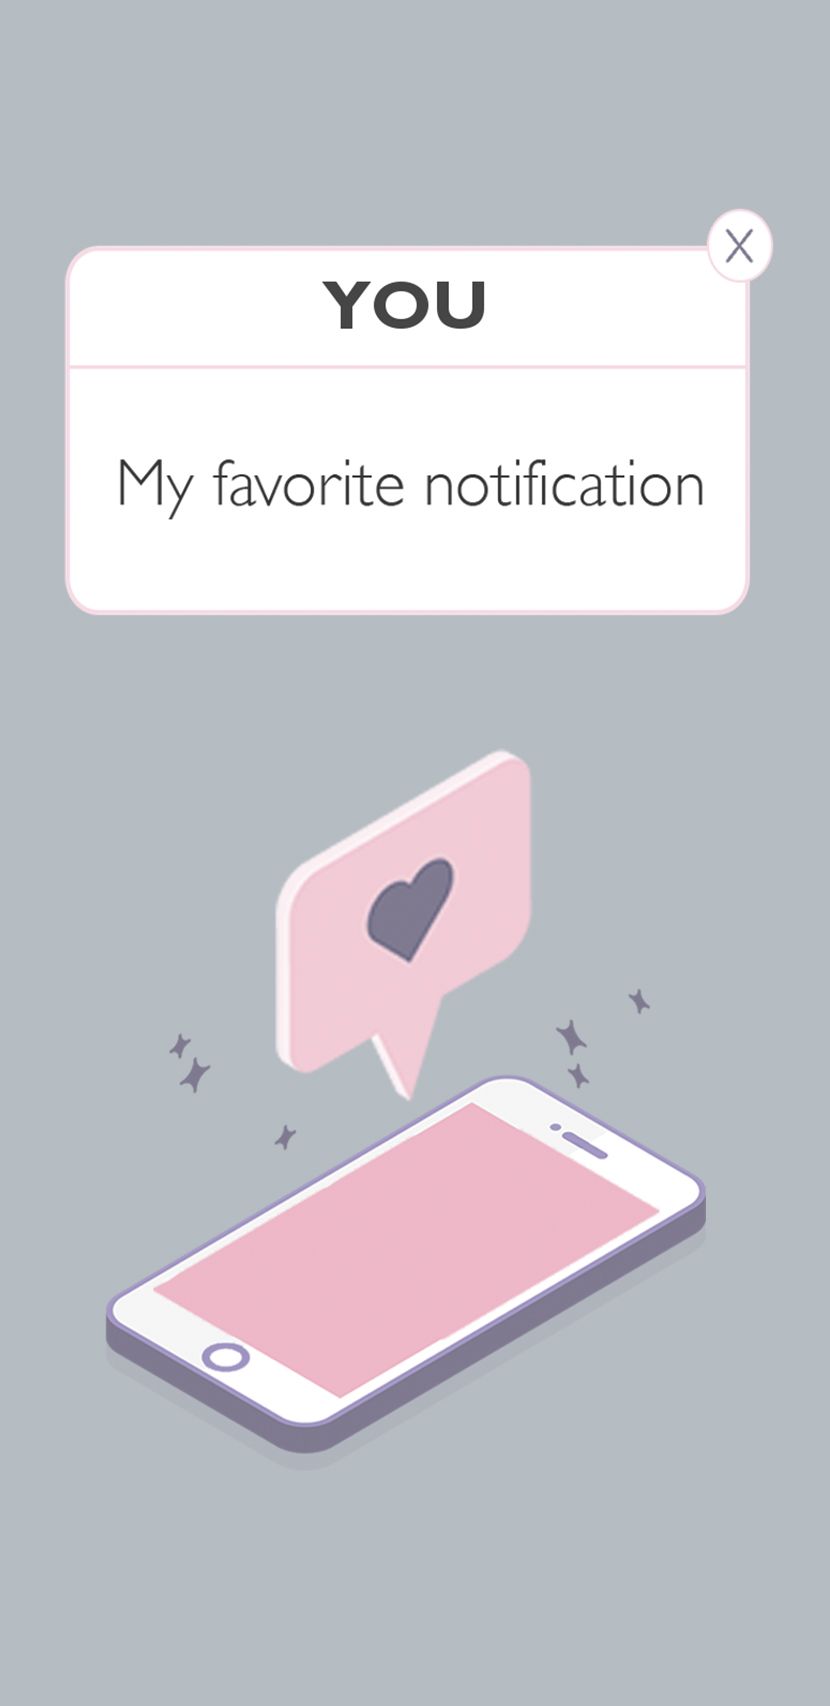 You Are My Favorite Notification